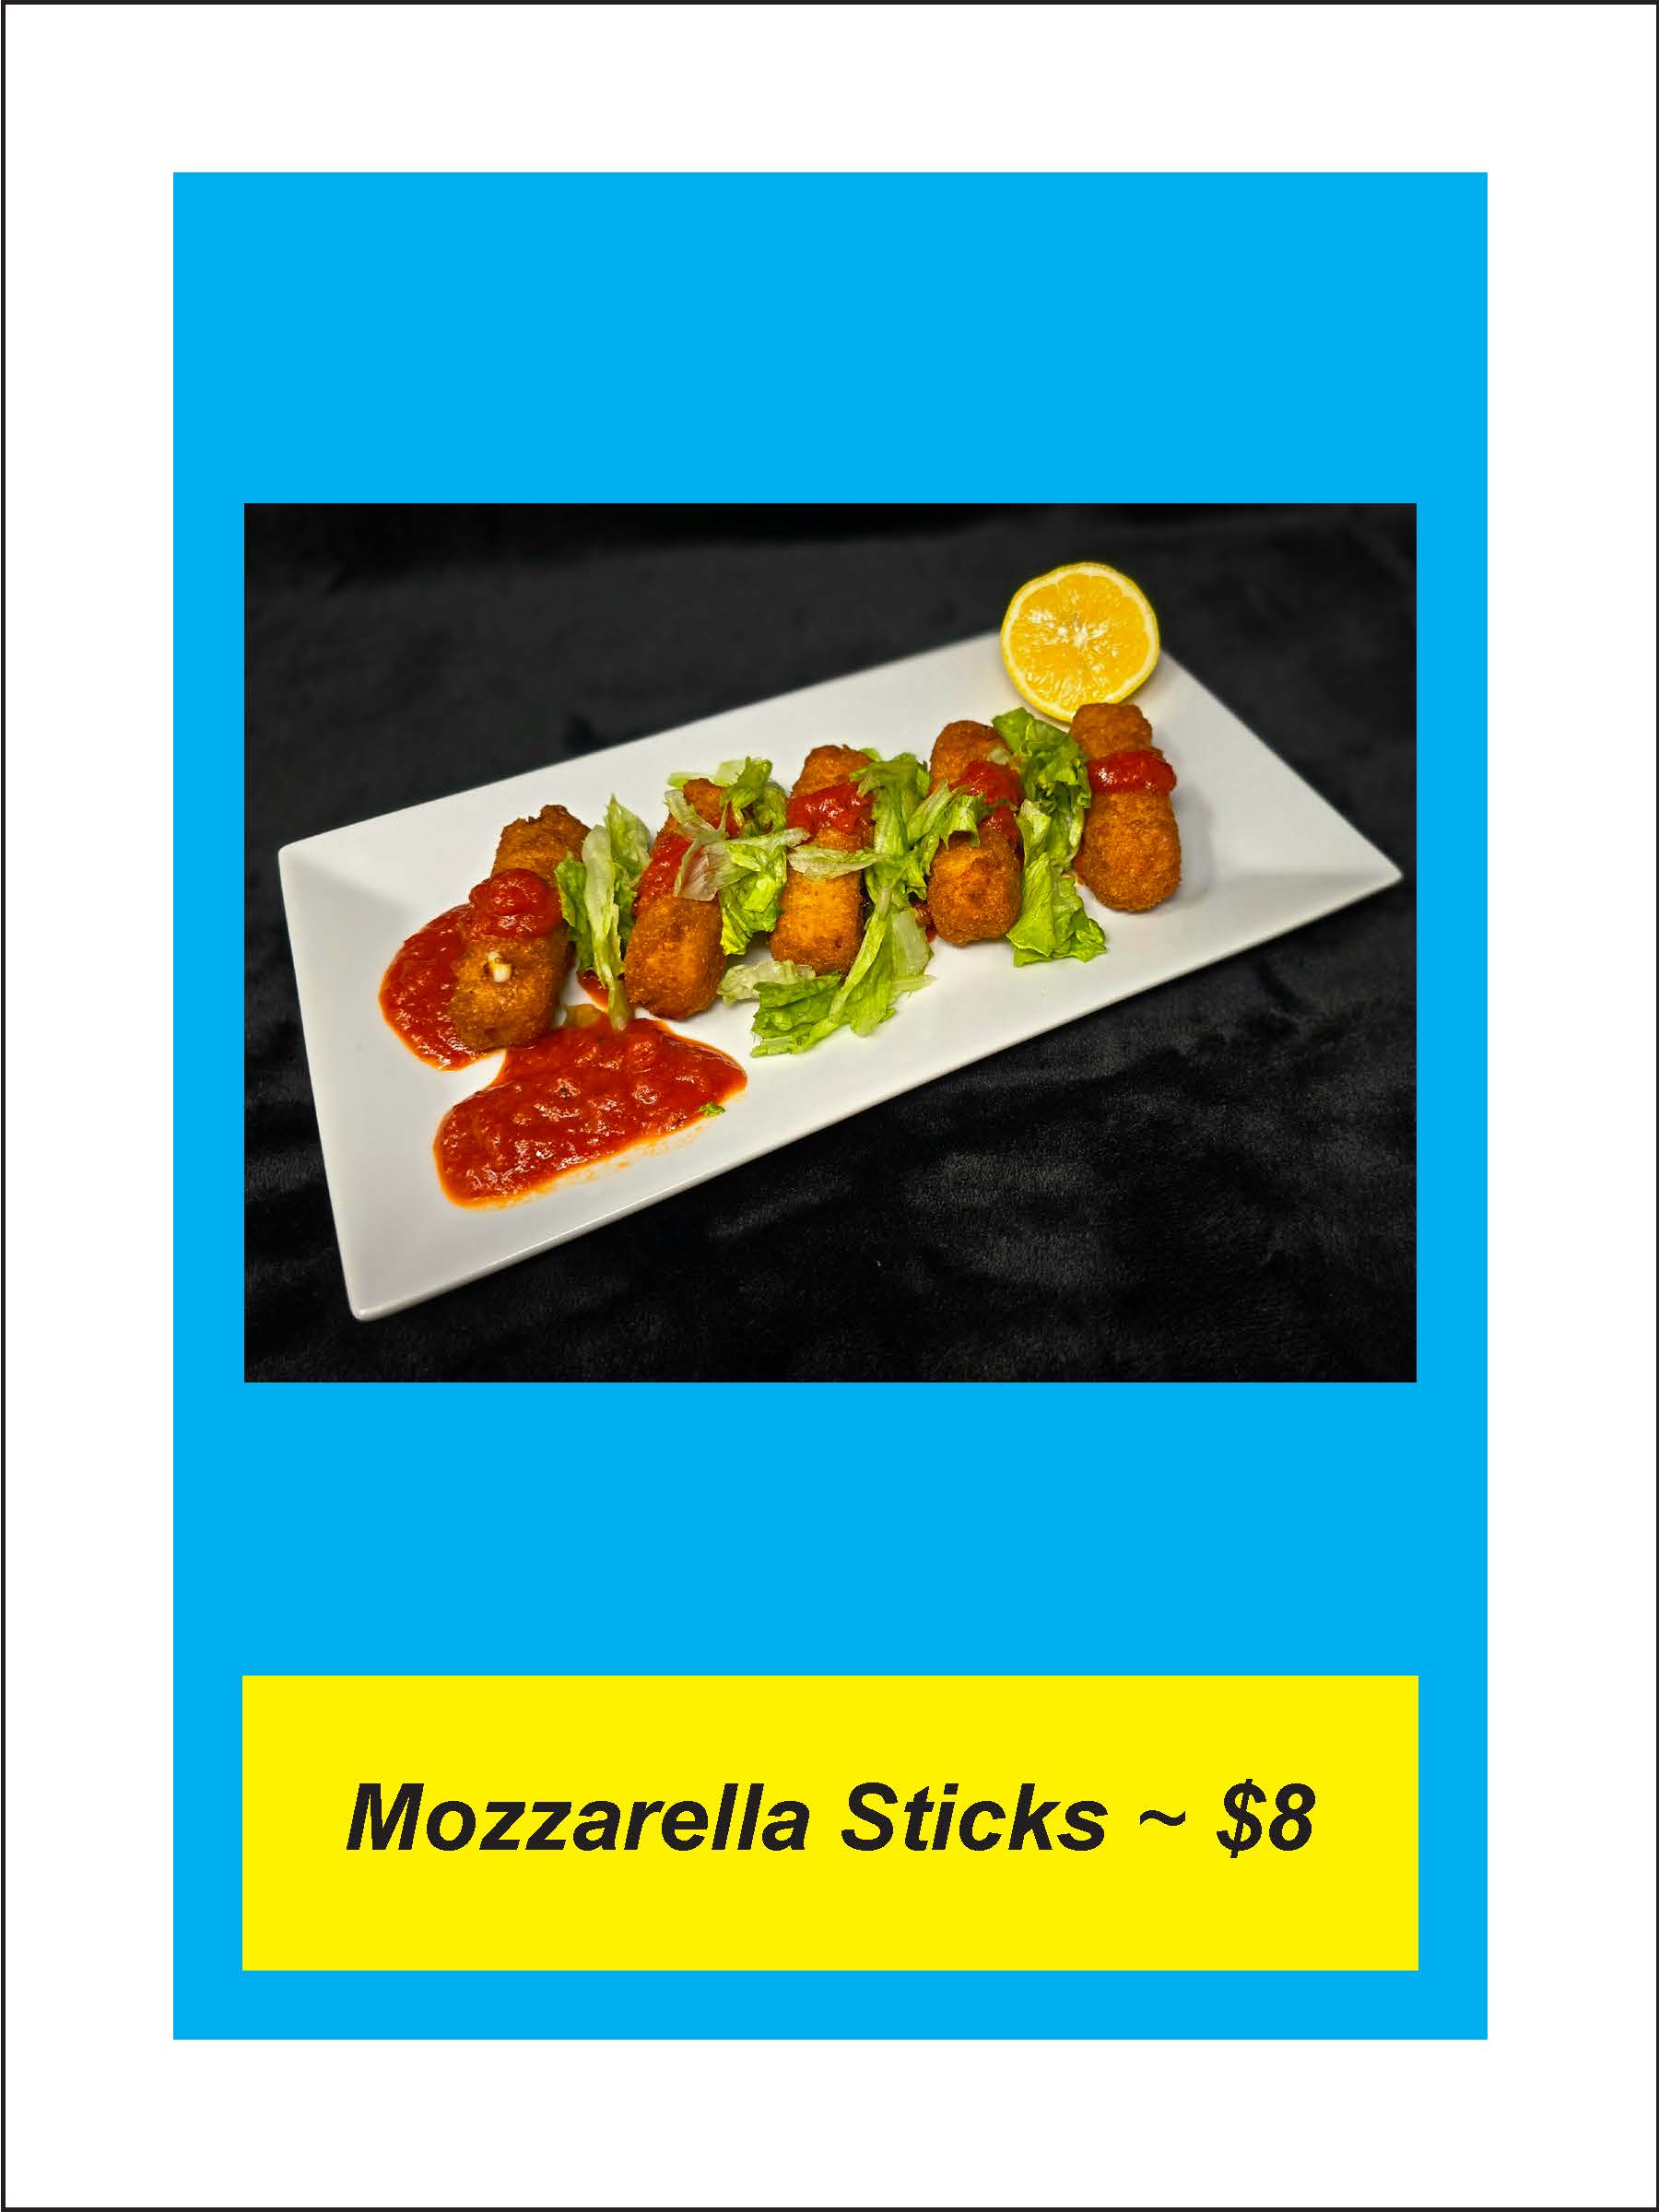 A rectangular white plate with mozzarella sticks, topped with a lemon slice and served with marinara sauce, on a black table. The text below reads, "Mozzarella Sticks ~ $8.